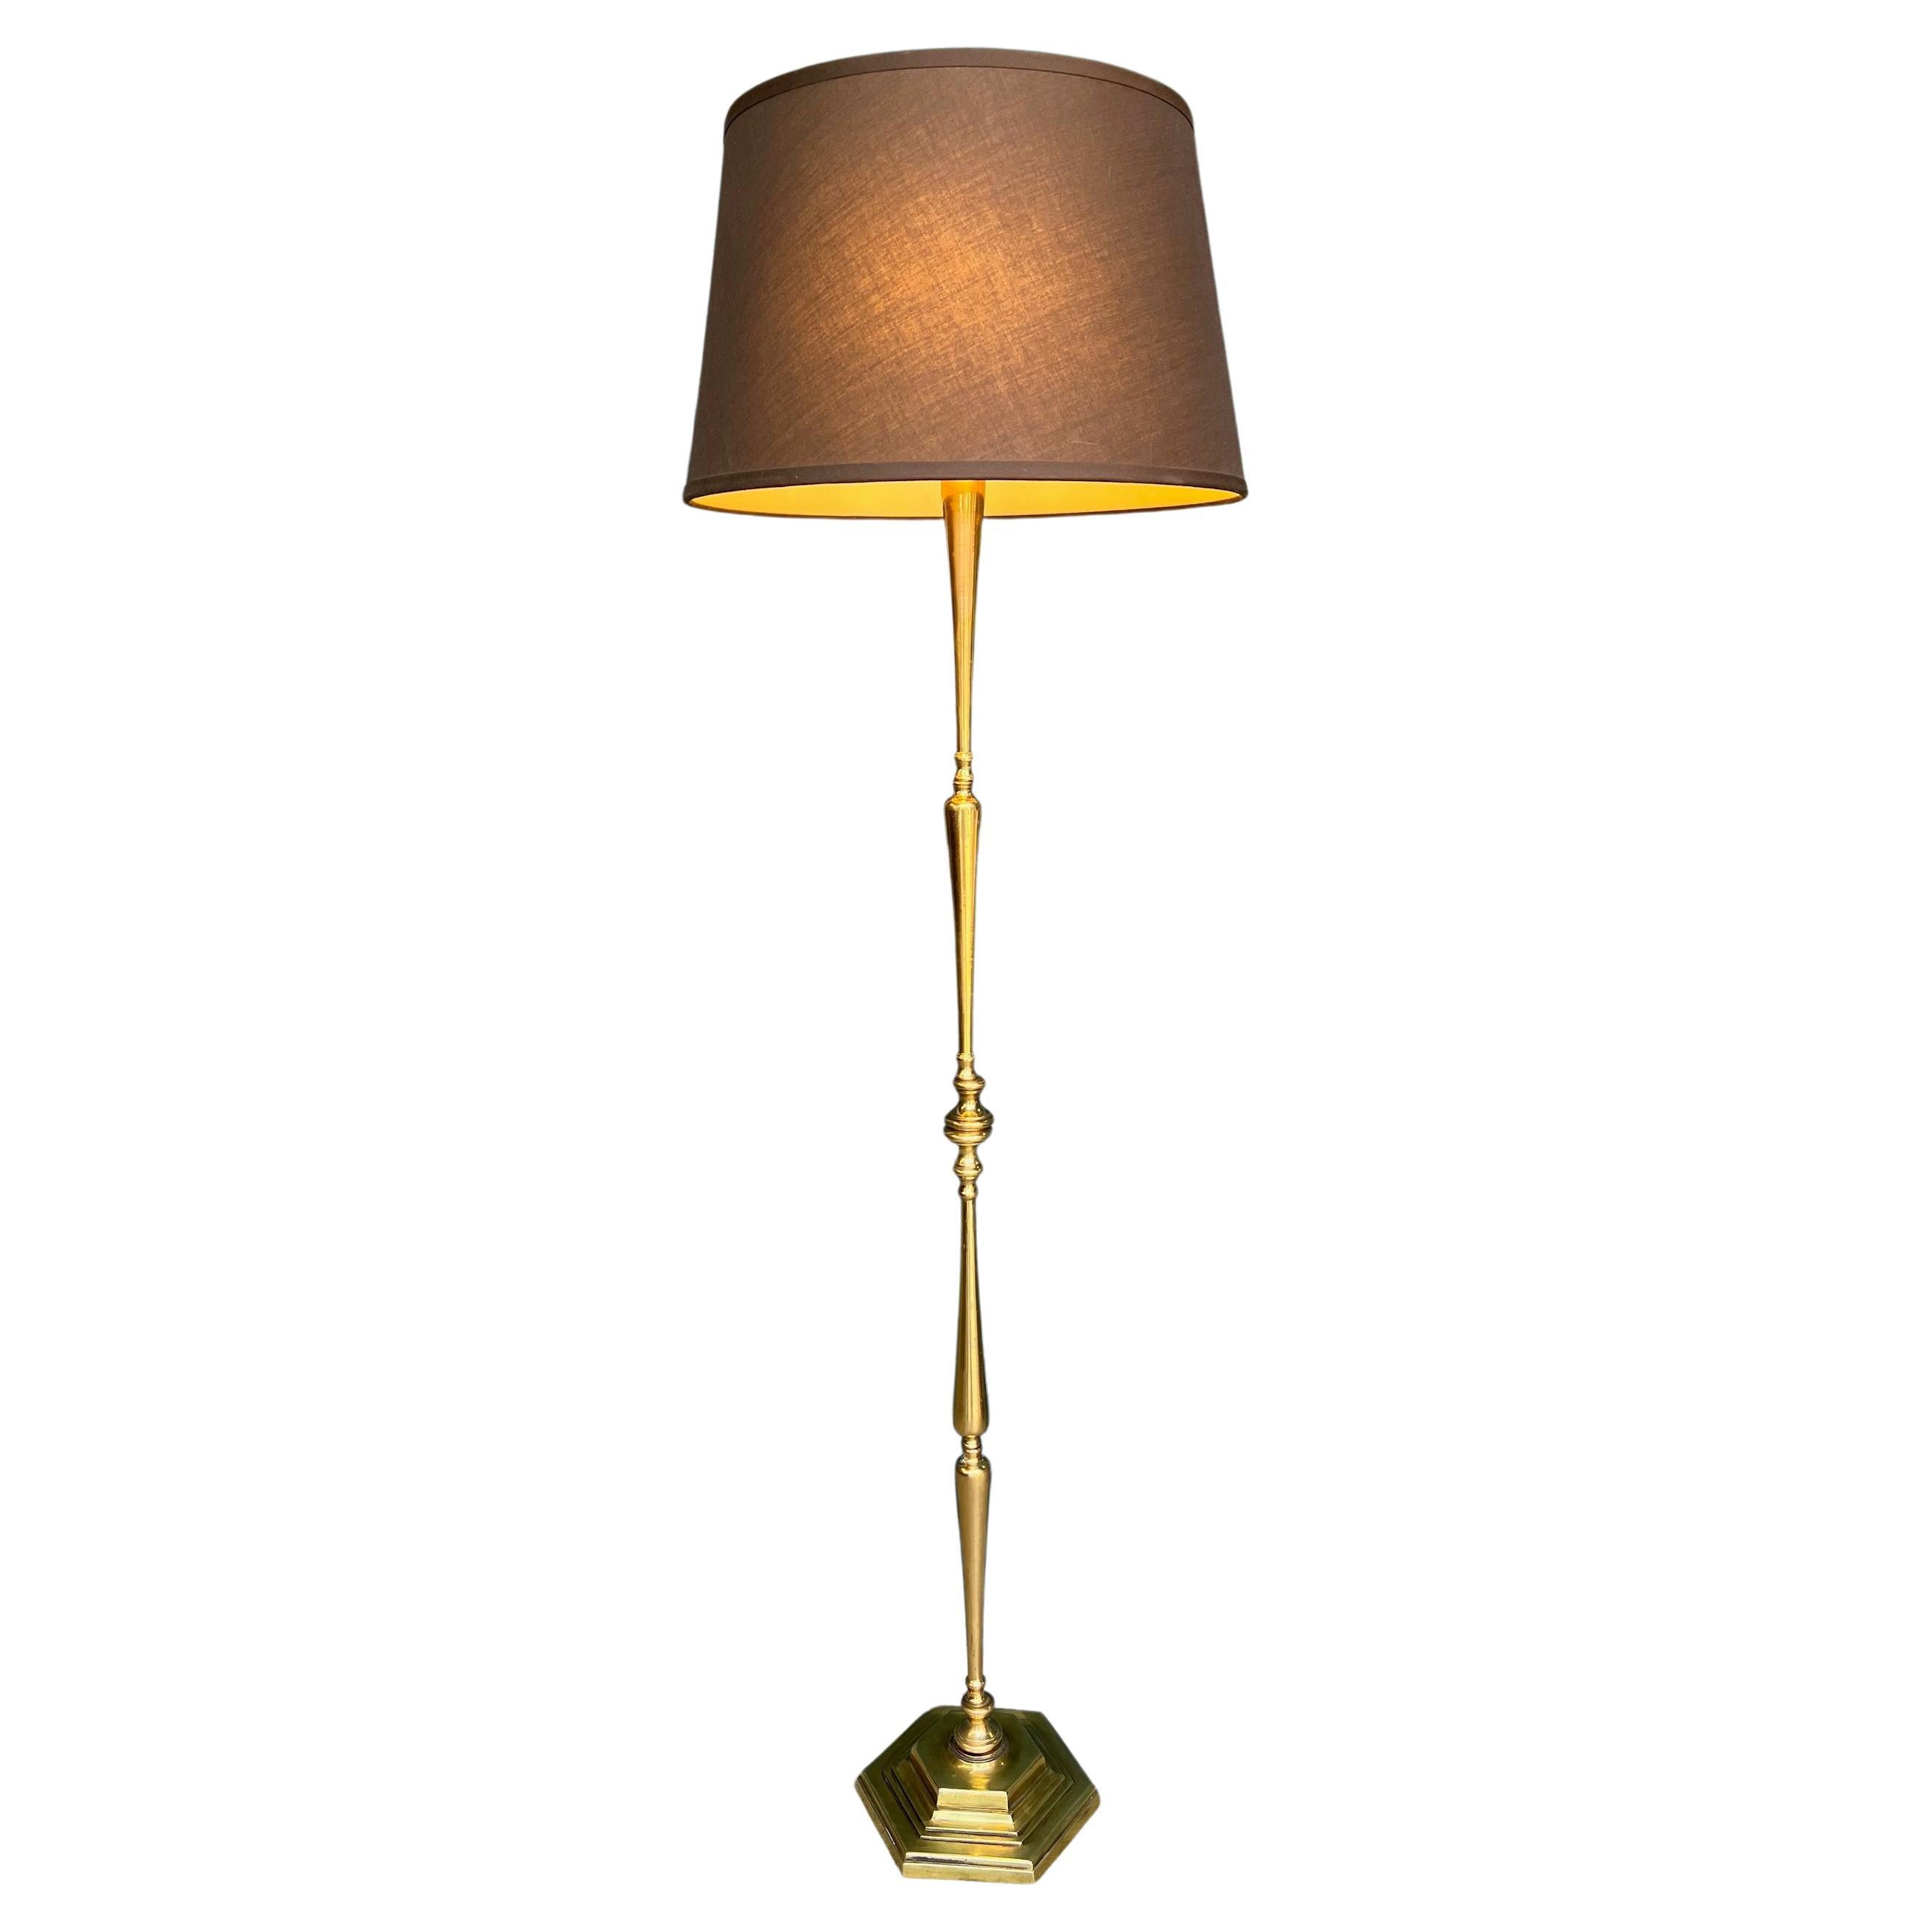 French 1940s Polished Brass Floor Lamp